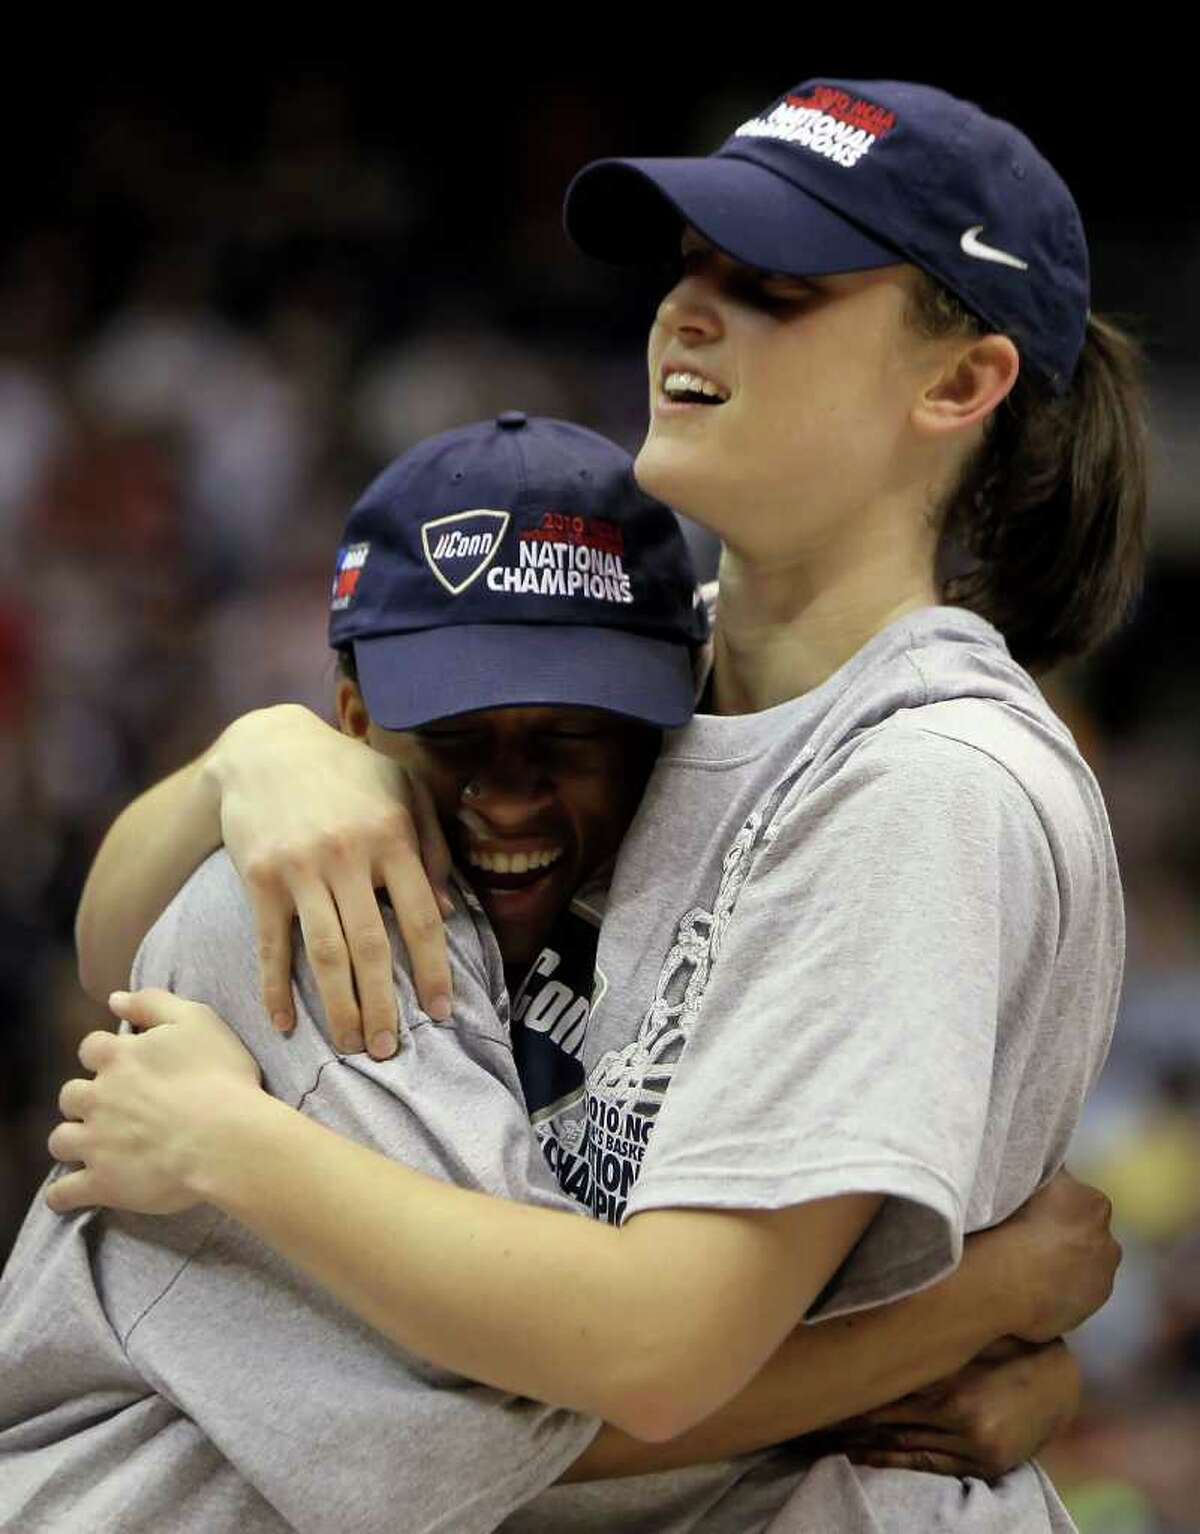 SAN ANTONIO - APRIL 06: Lorin Dixon (L) and Kelly Faris of the Connecticut Huskies hug each other as they celebrate after a 53-47 victory over the Stanford Cardinal during the NCAA Women's Final Four Championship game at the Alamodome on April 6, 2010 in San Antonio, Texas. (Photo by Jeff Gross/Getty Images) *** Local Caption *** Lorin Dixon;Kelly Faris